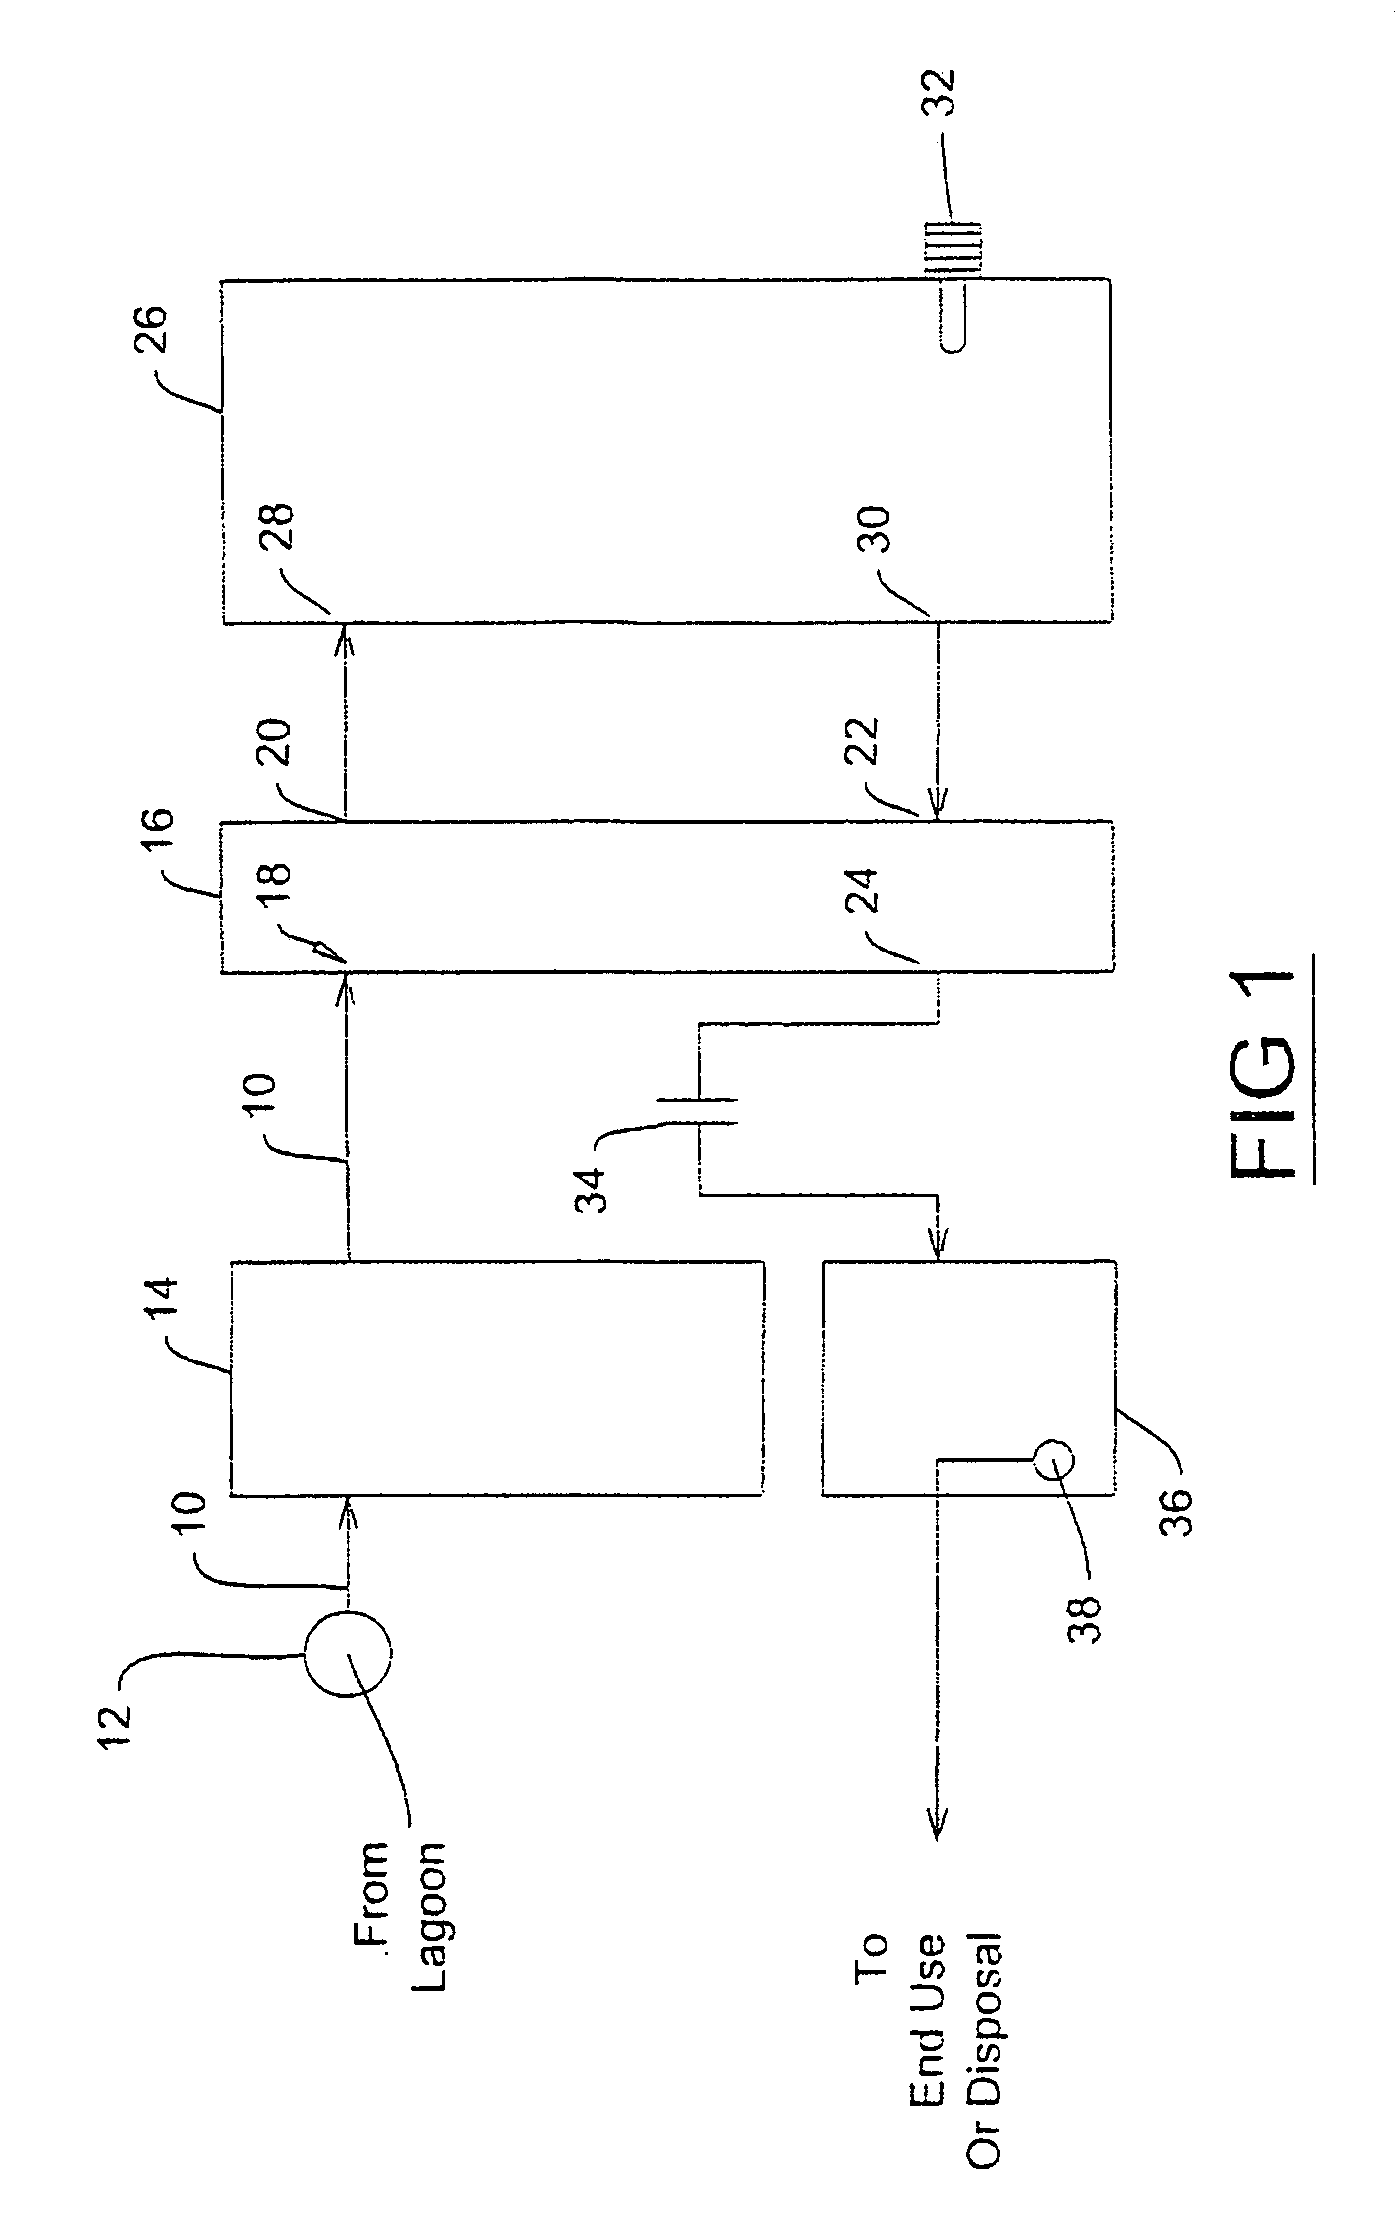 Fluid treatment process and apparatus